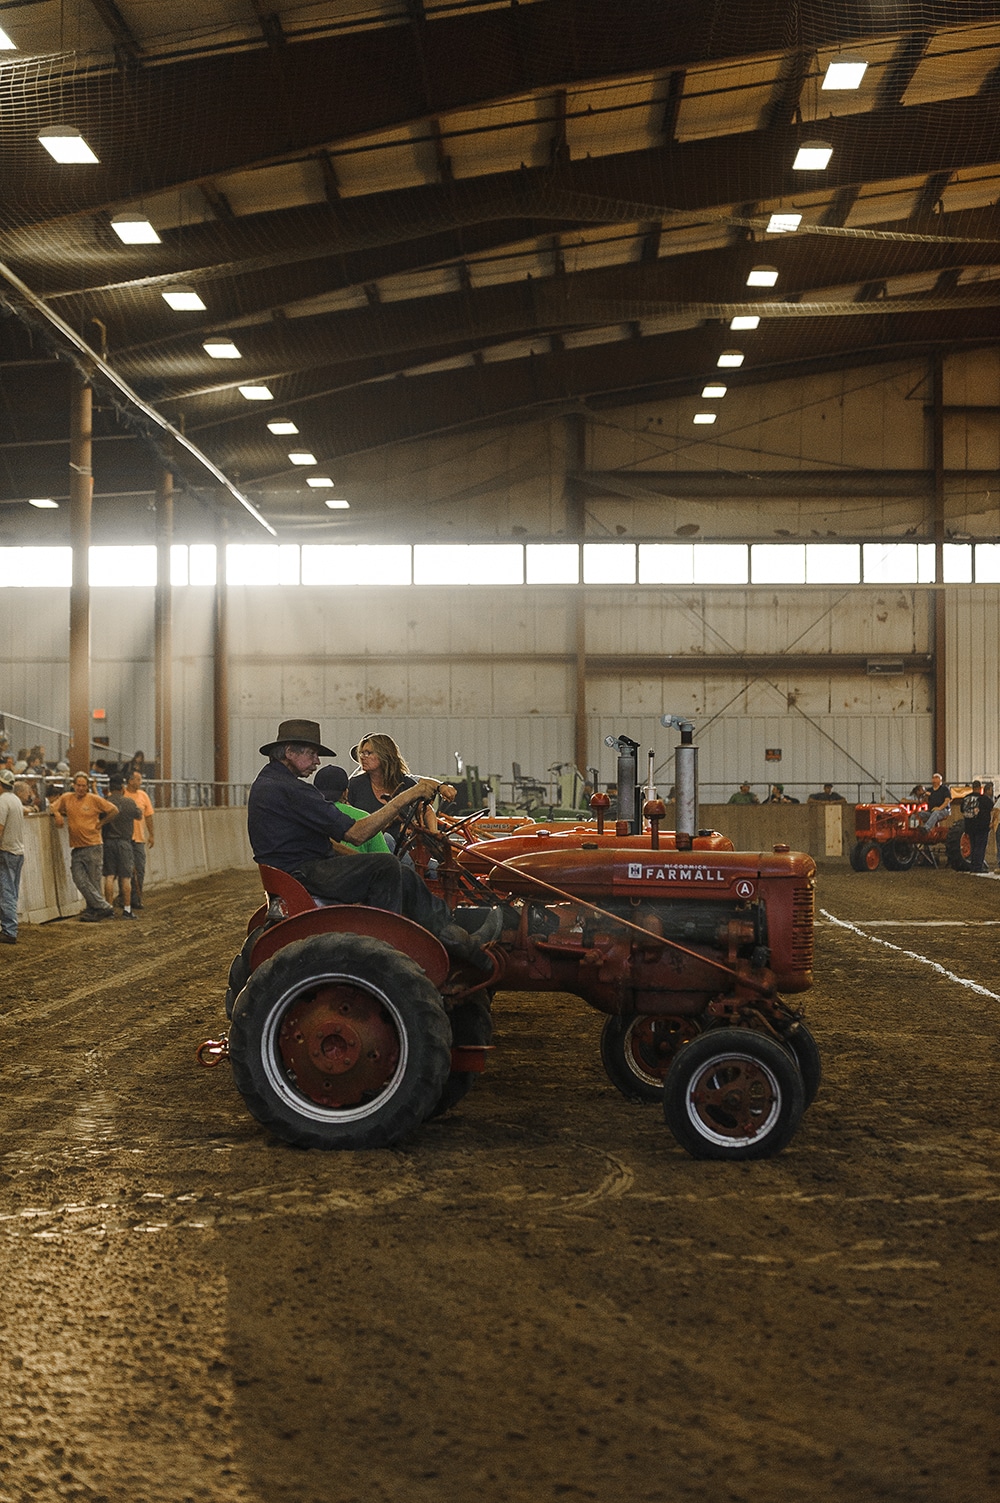 Participants line up for the Tractor Pull.